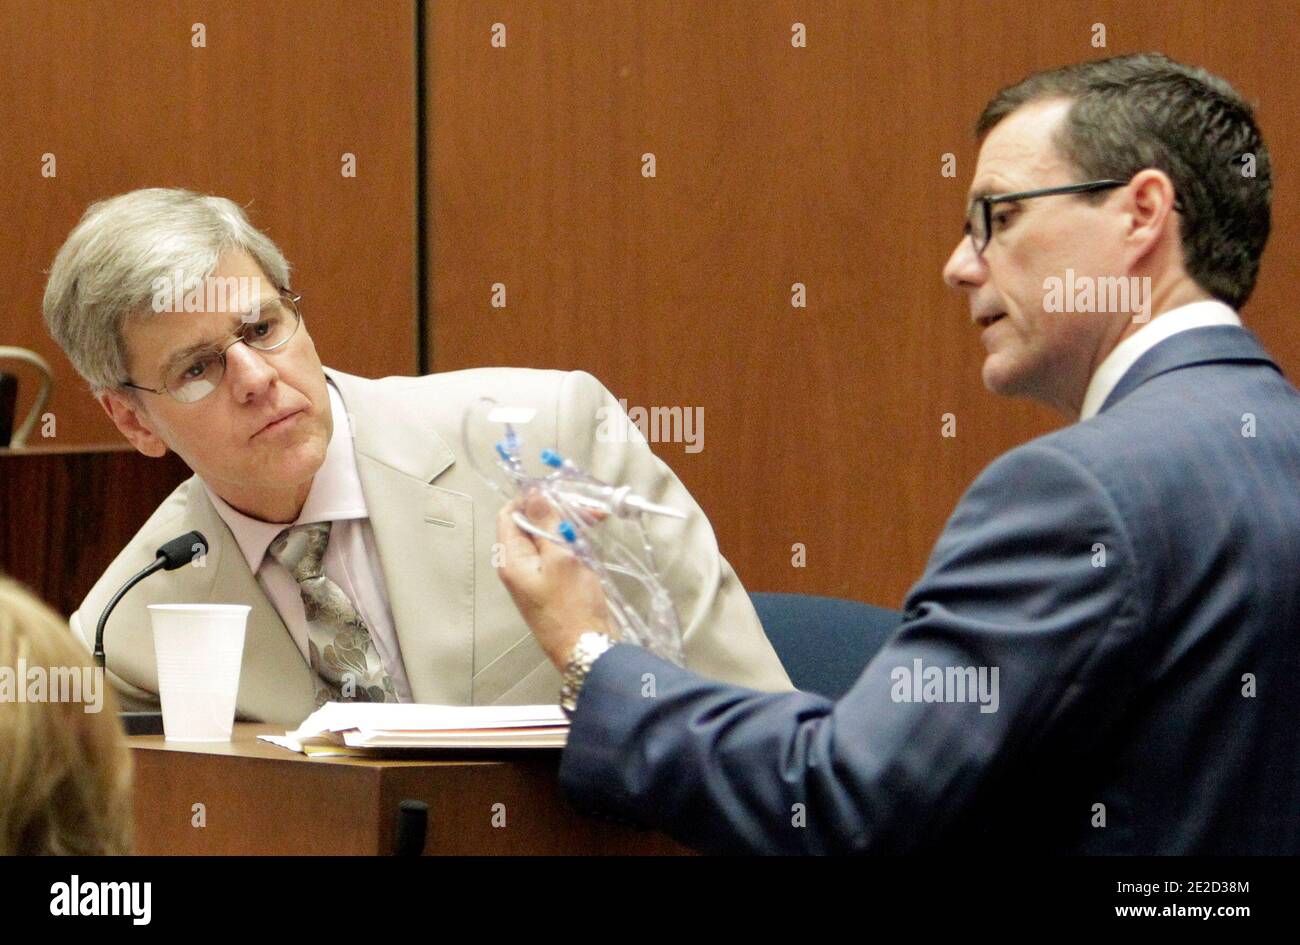 Anesthesiology expert Dr. Steven Shafer, left, looks at an intravenous line as he is cross examined by Ed Chernoff, right, a defense attorney for Dr. Conrad Murray, during Murray's involuntary manslaughter trial in Los Angeles, CA, USA, on October 21, 2011. Murray has pleaded not guilty and faces four years in prison and the loss of his medical license if convicted of involuntary manslaughter in Michael Jackson's death. Photo by Reed Saxon/Pool/ABACAPRESS.COM Stock Photo